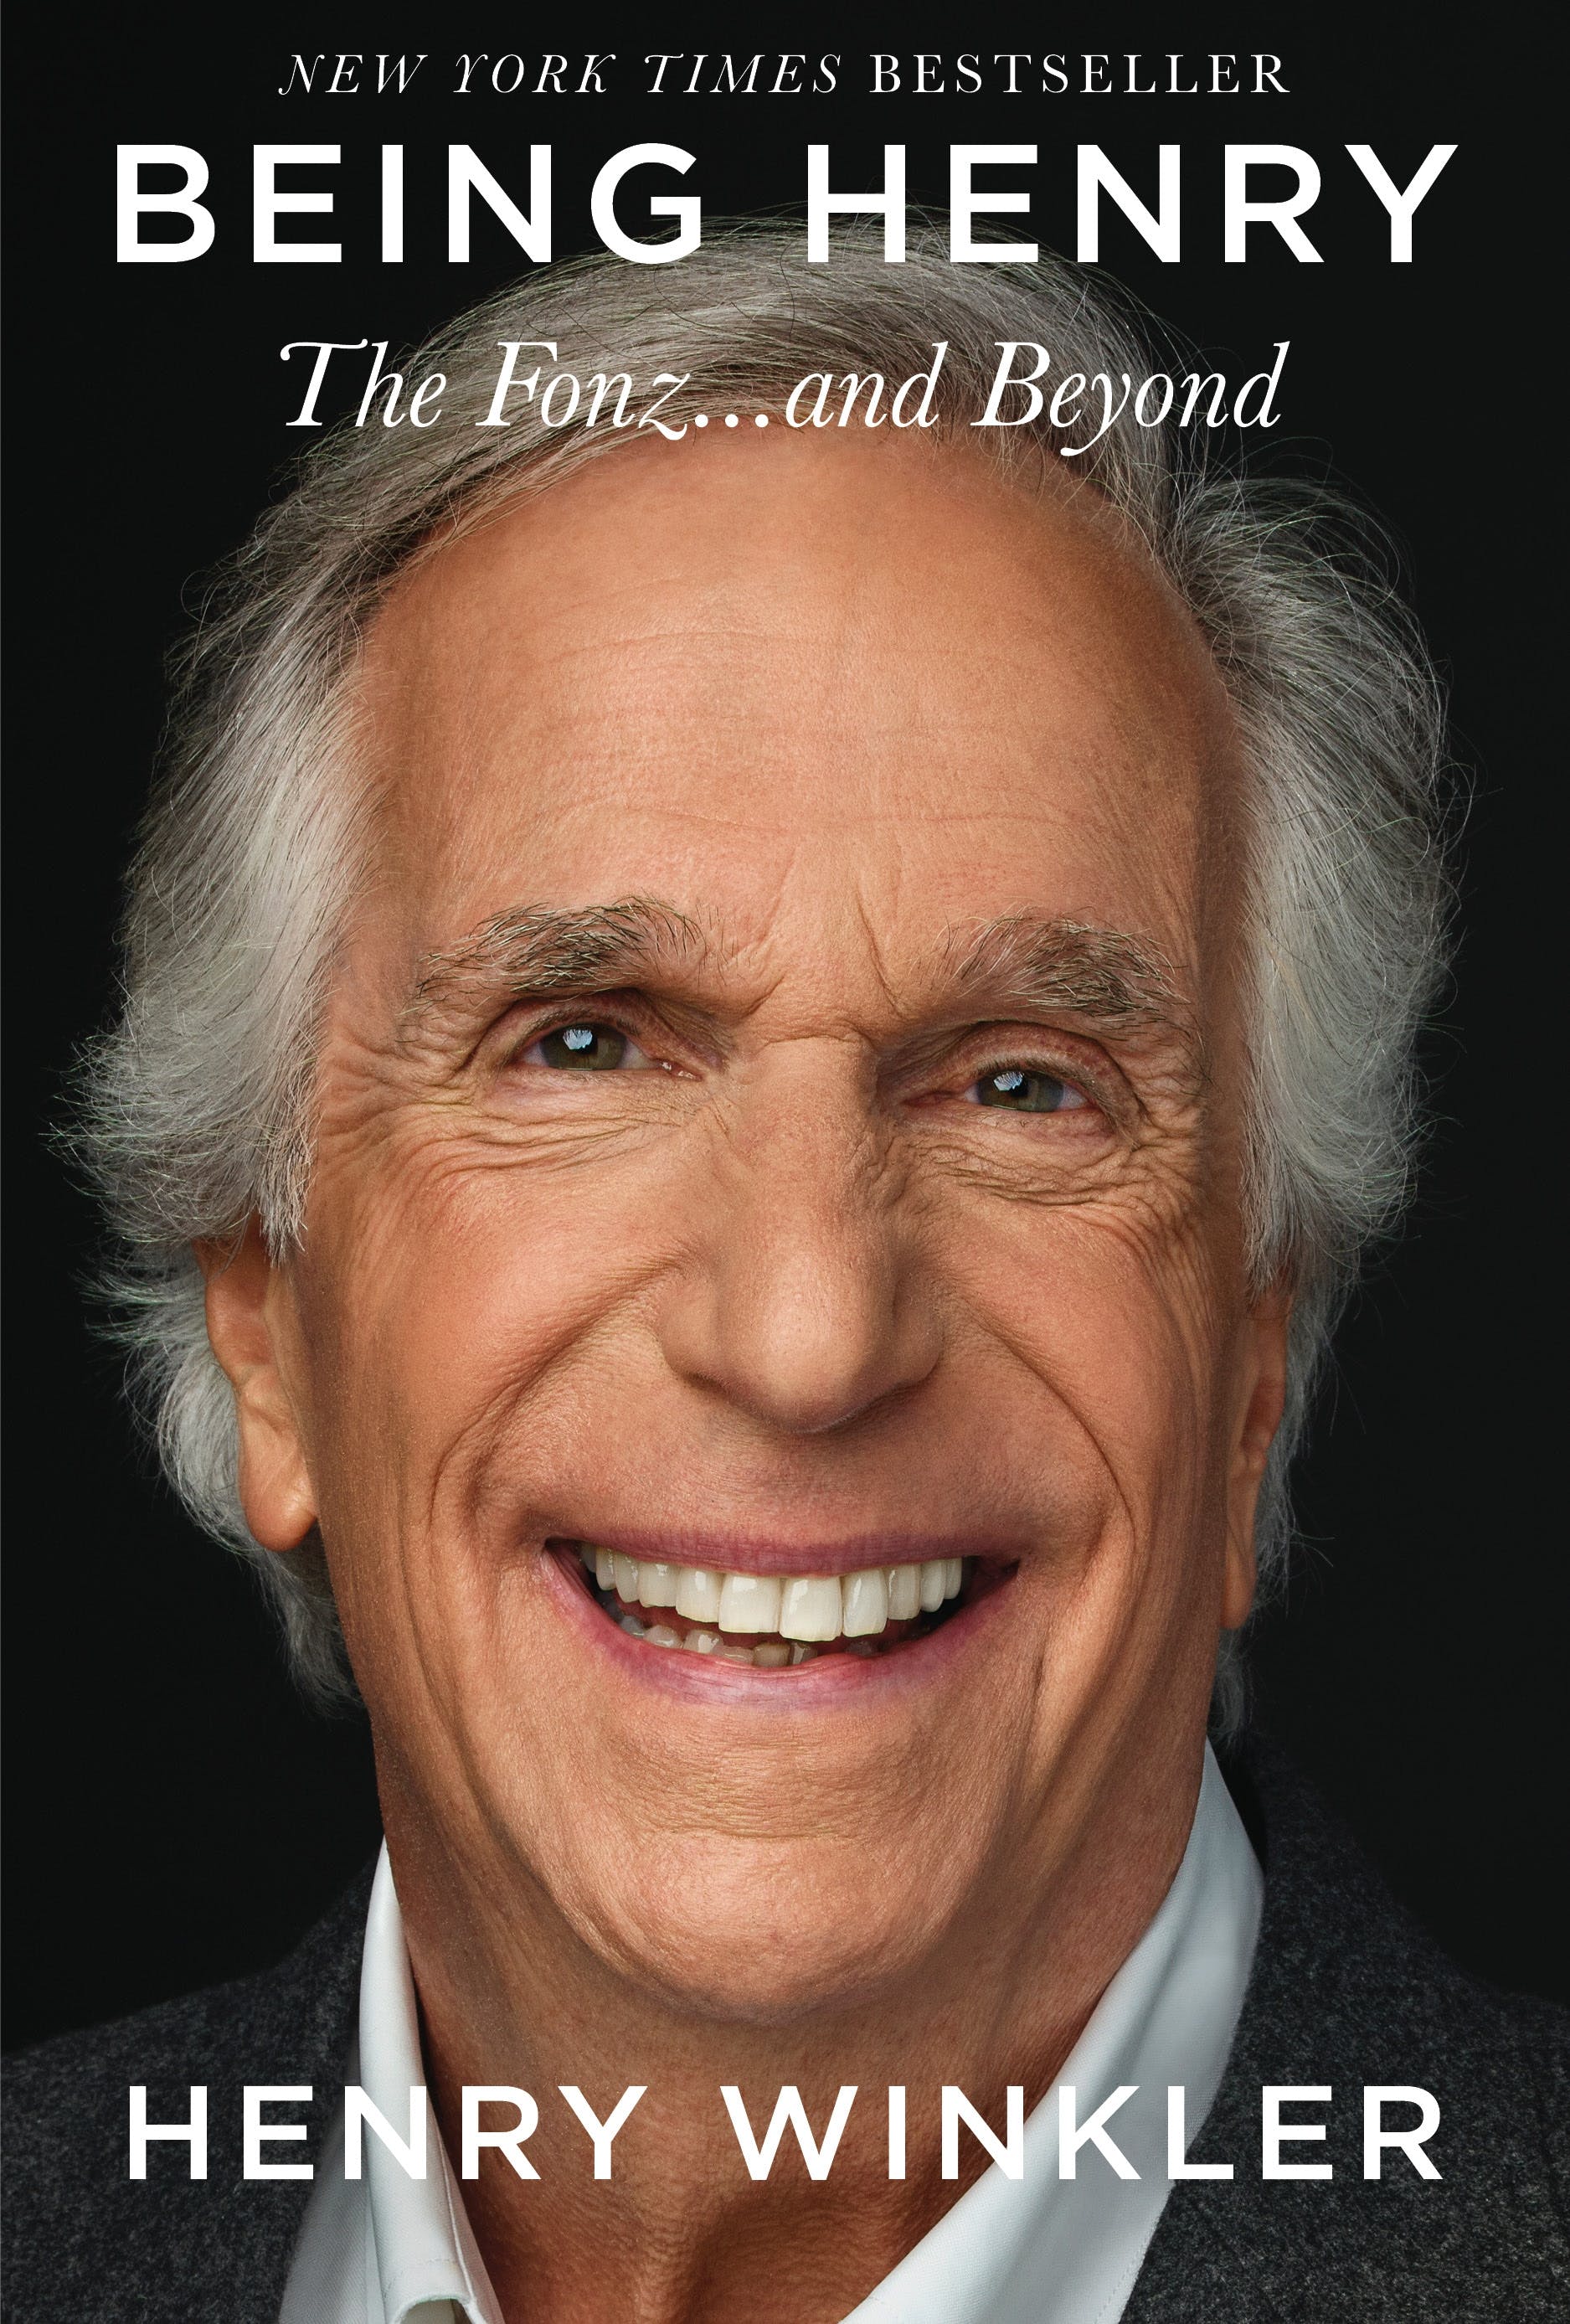 Book cover for "Being Henry" by Henry Winkler